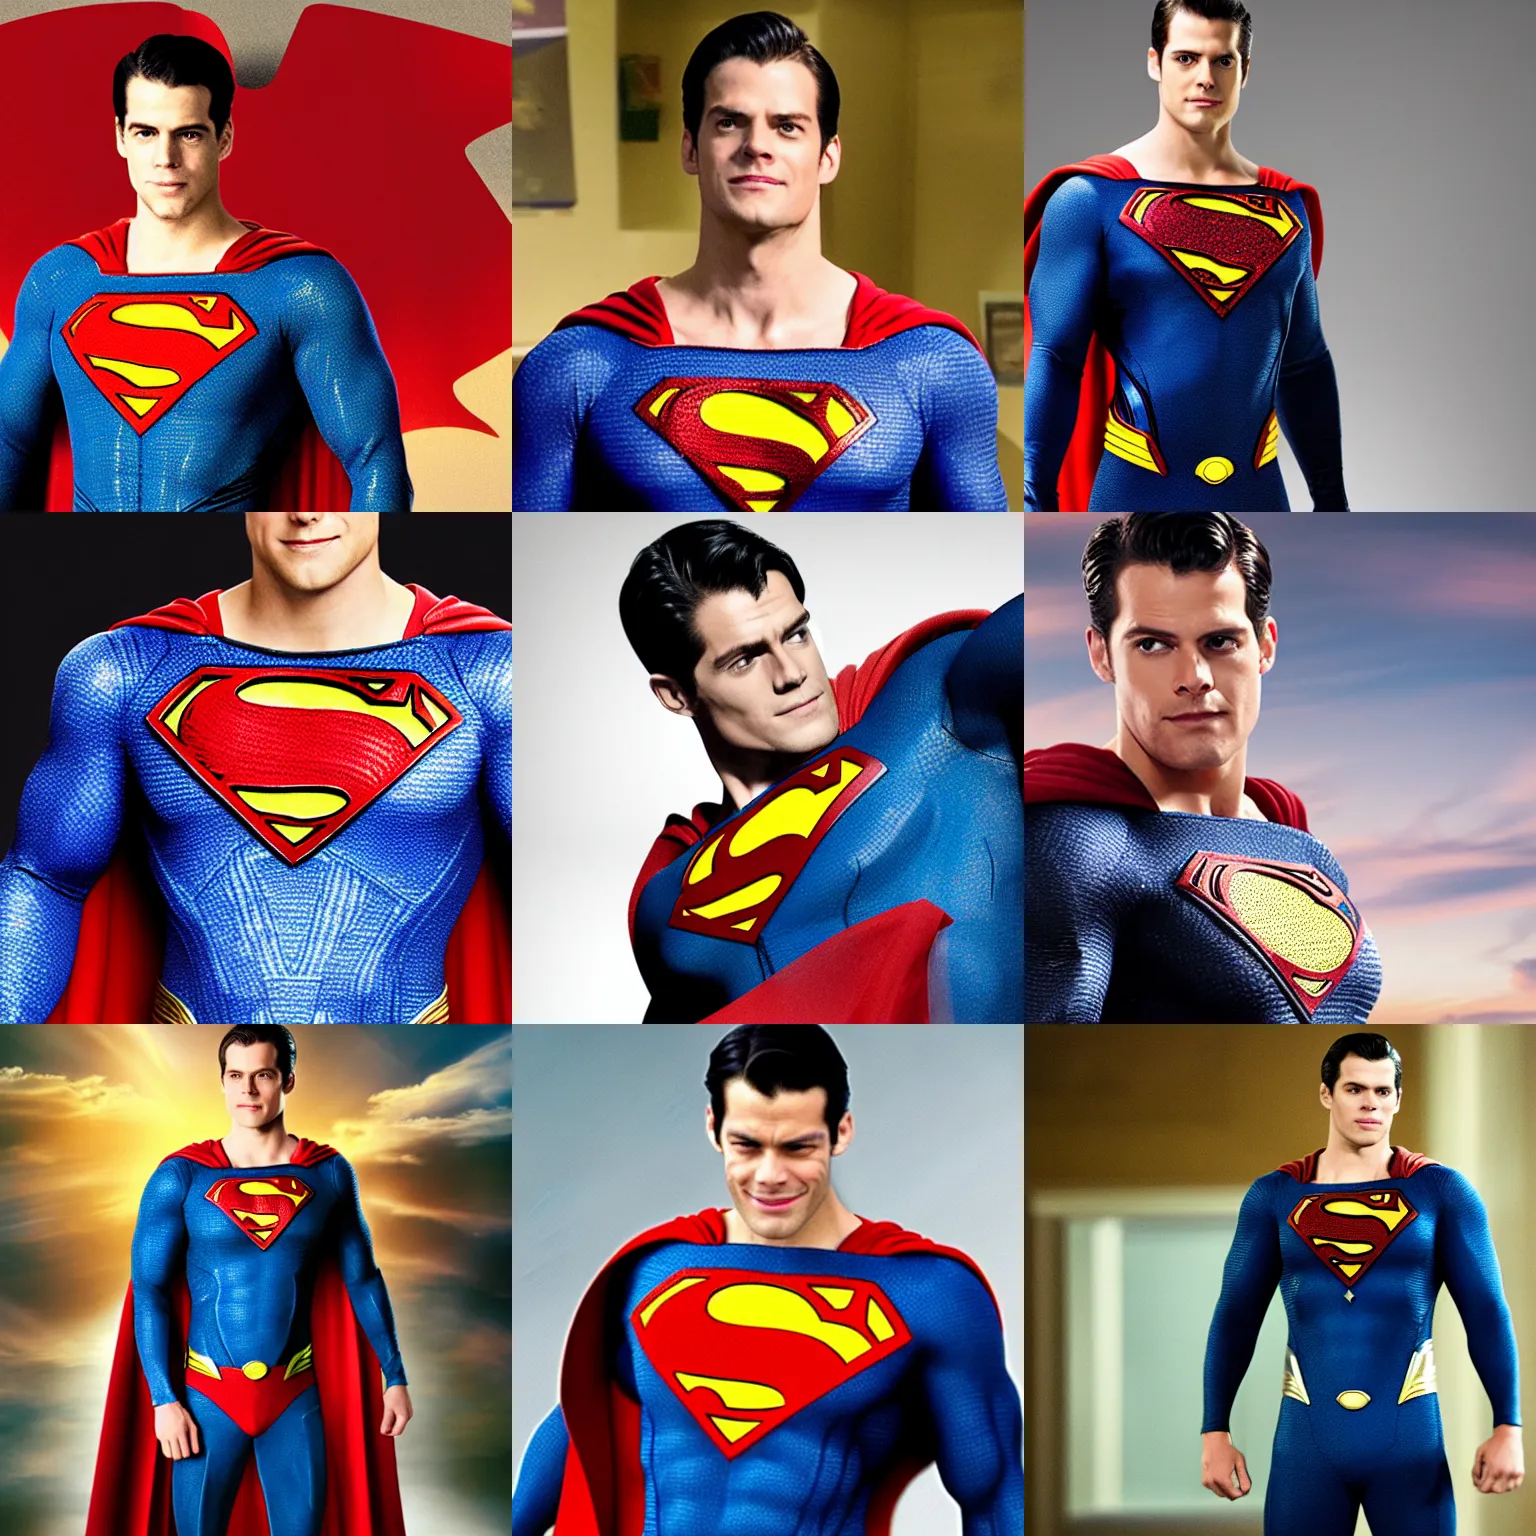 gustin grant as superman | Stable Diffusion